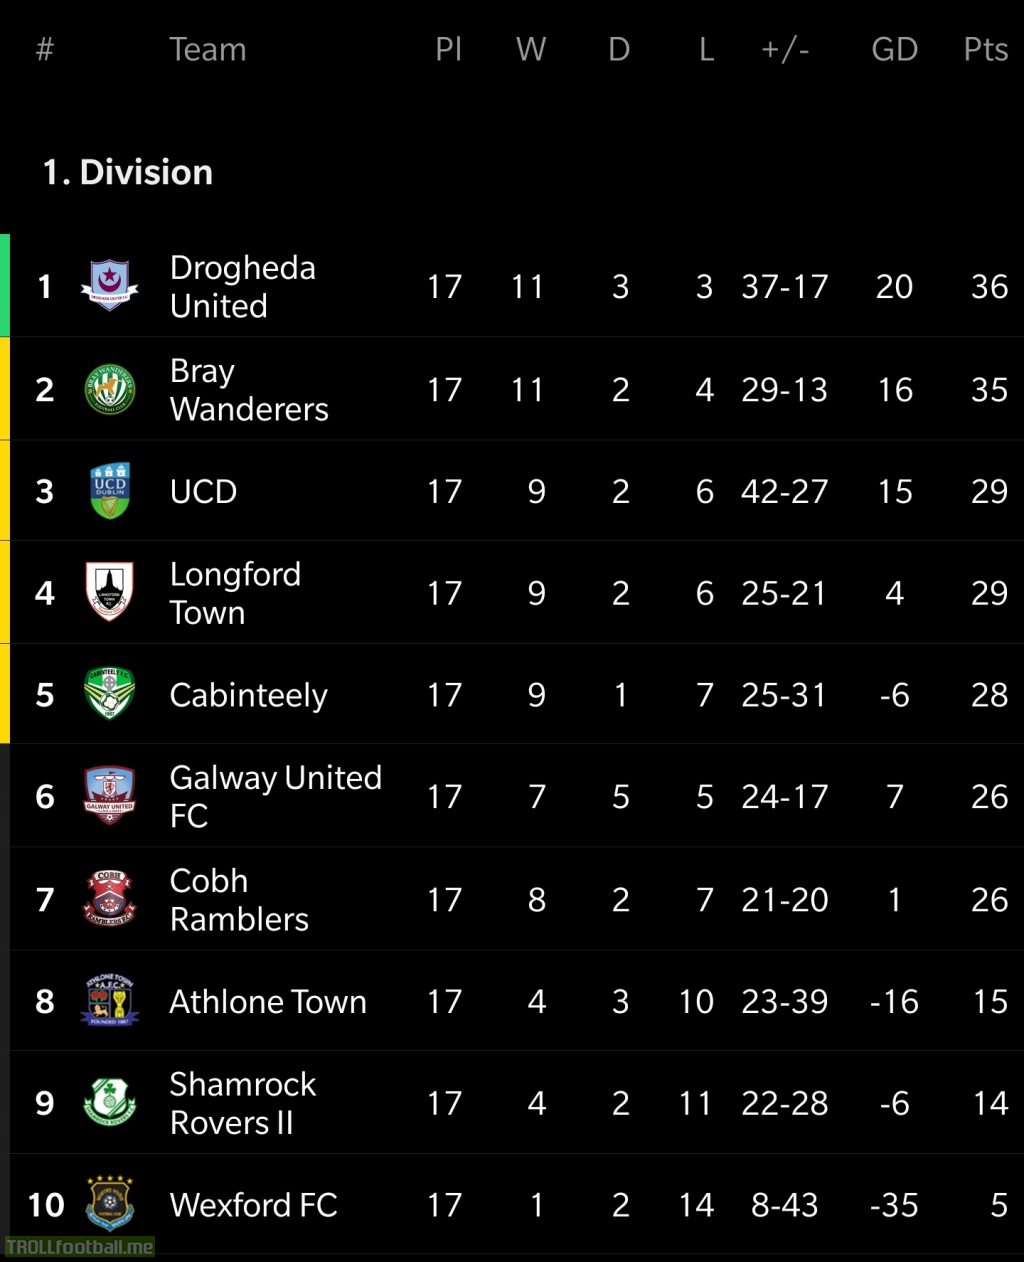 Today is the final day of the League of Ireland First Division - 2 teams can still win the league, 7/10 teams still have promotion on the table and every game tonight will effect either the title or playoffs